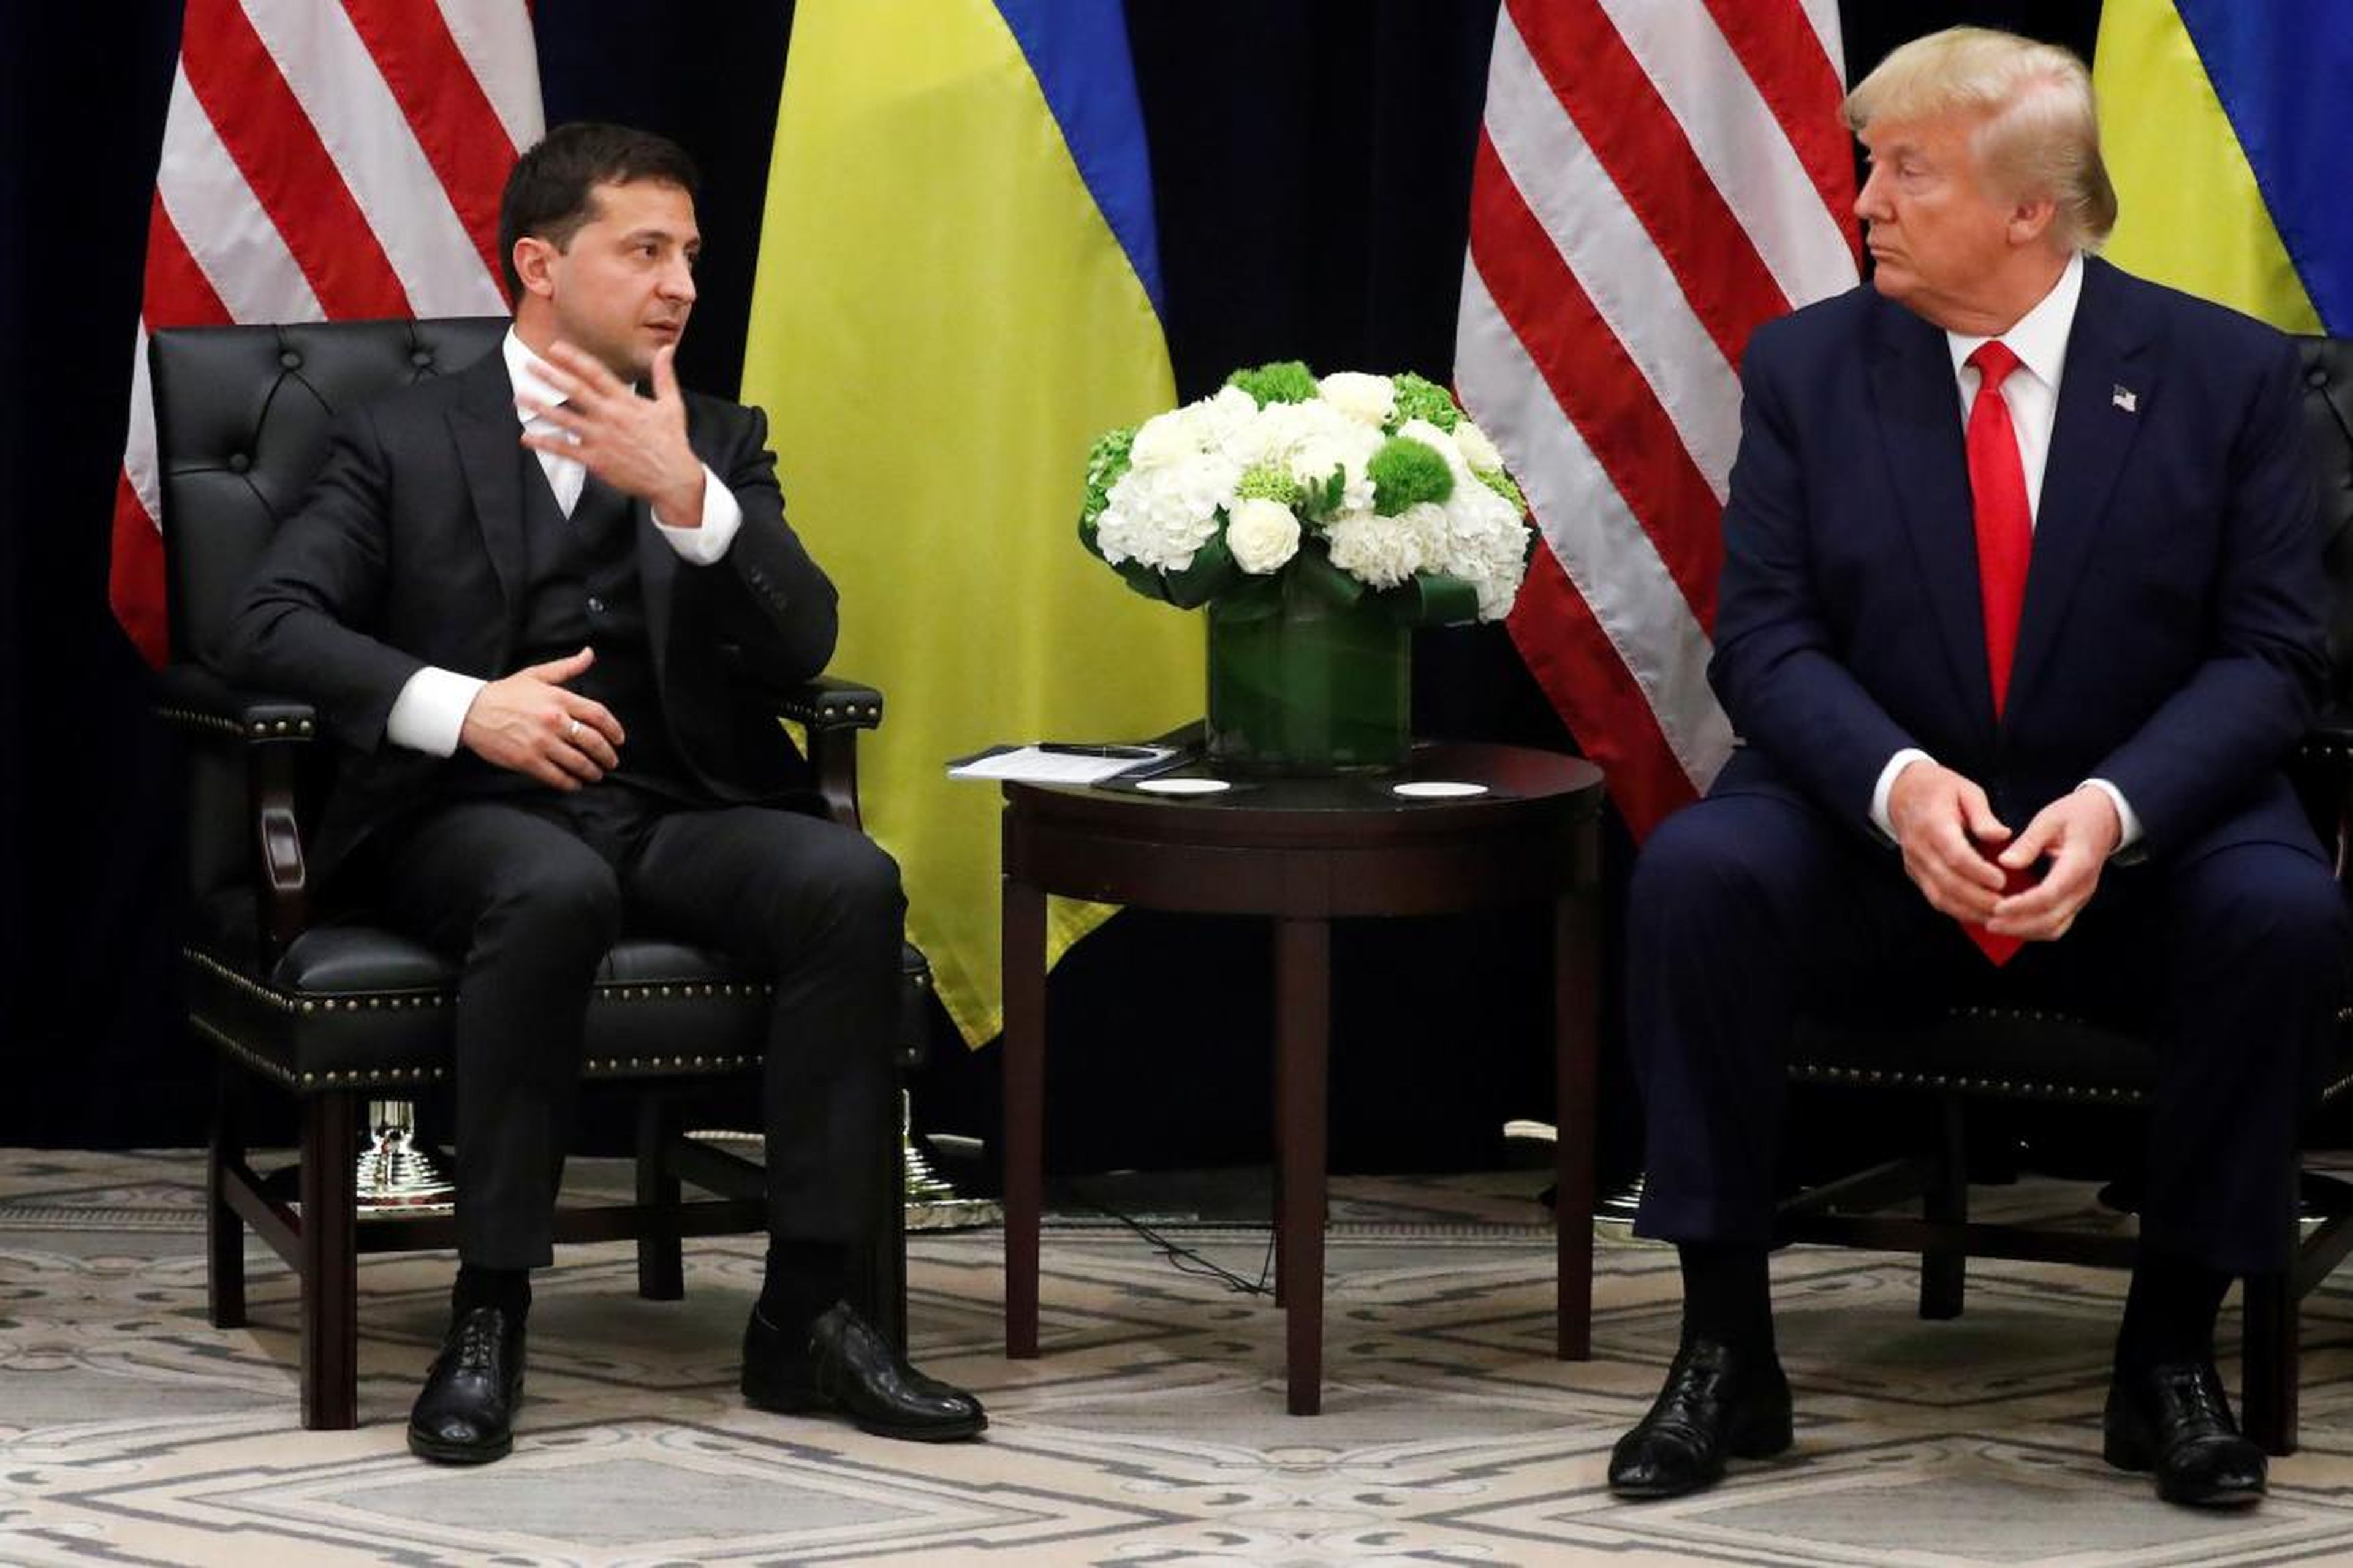 Ukraine's President Volodymyr Zelensky meets US President Donald Trump at the United Nations General Assembly in New York City on September 25, 2019.